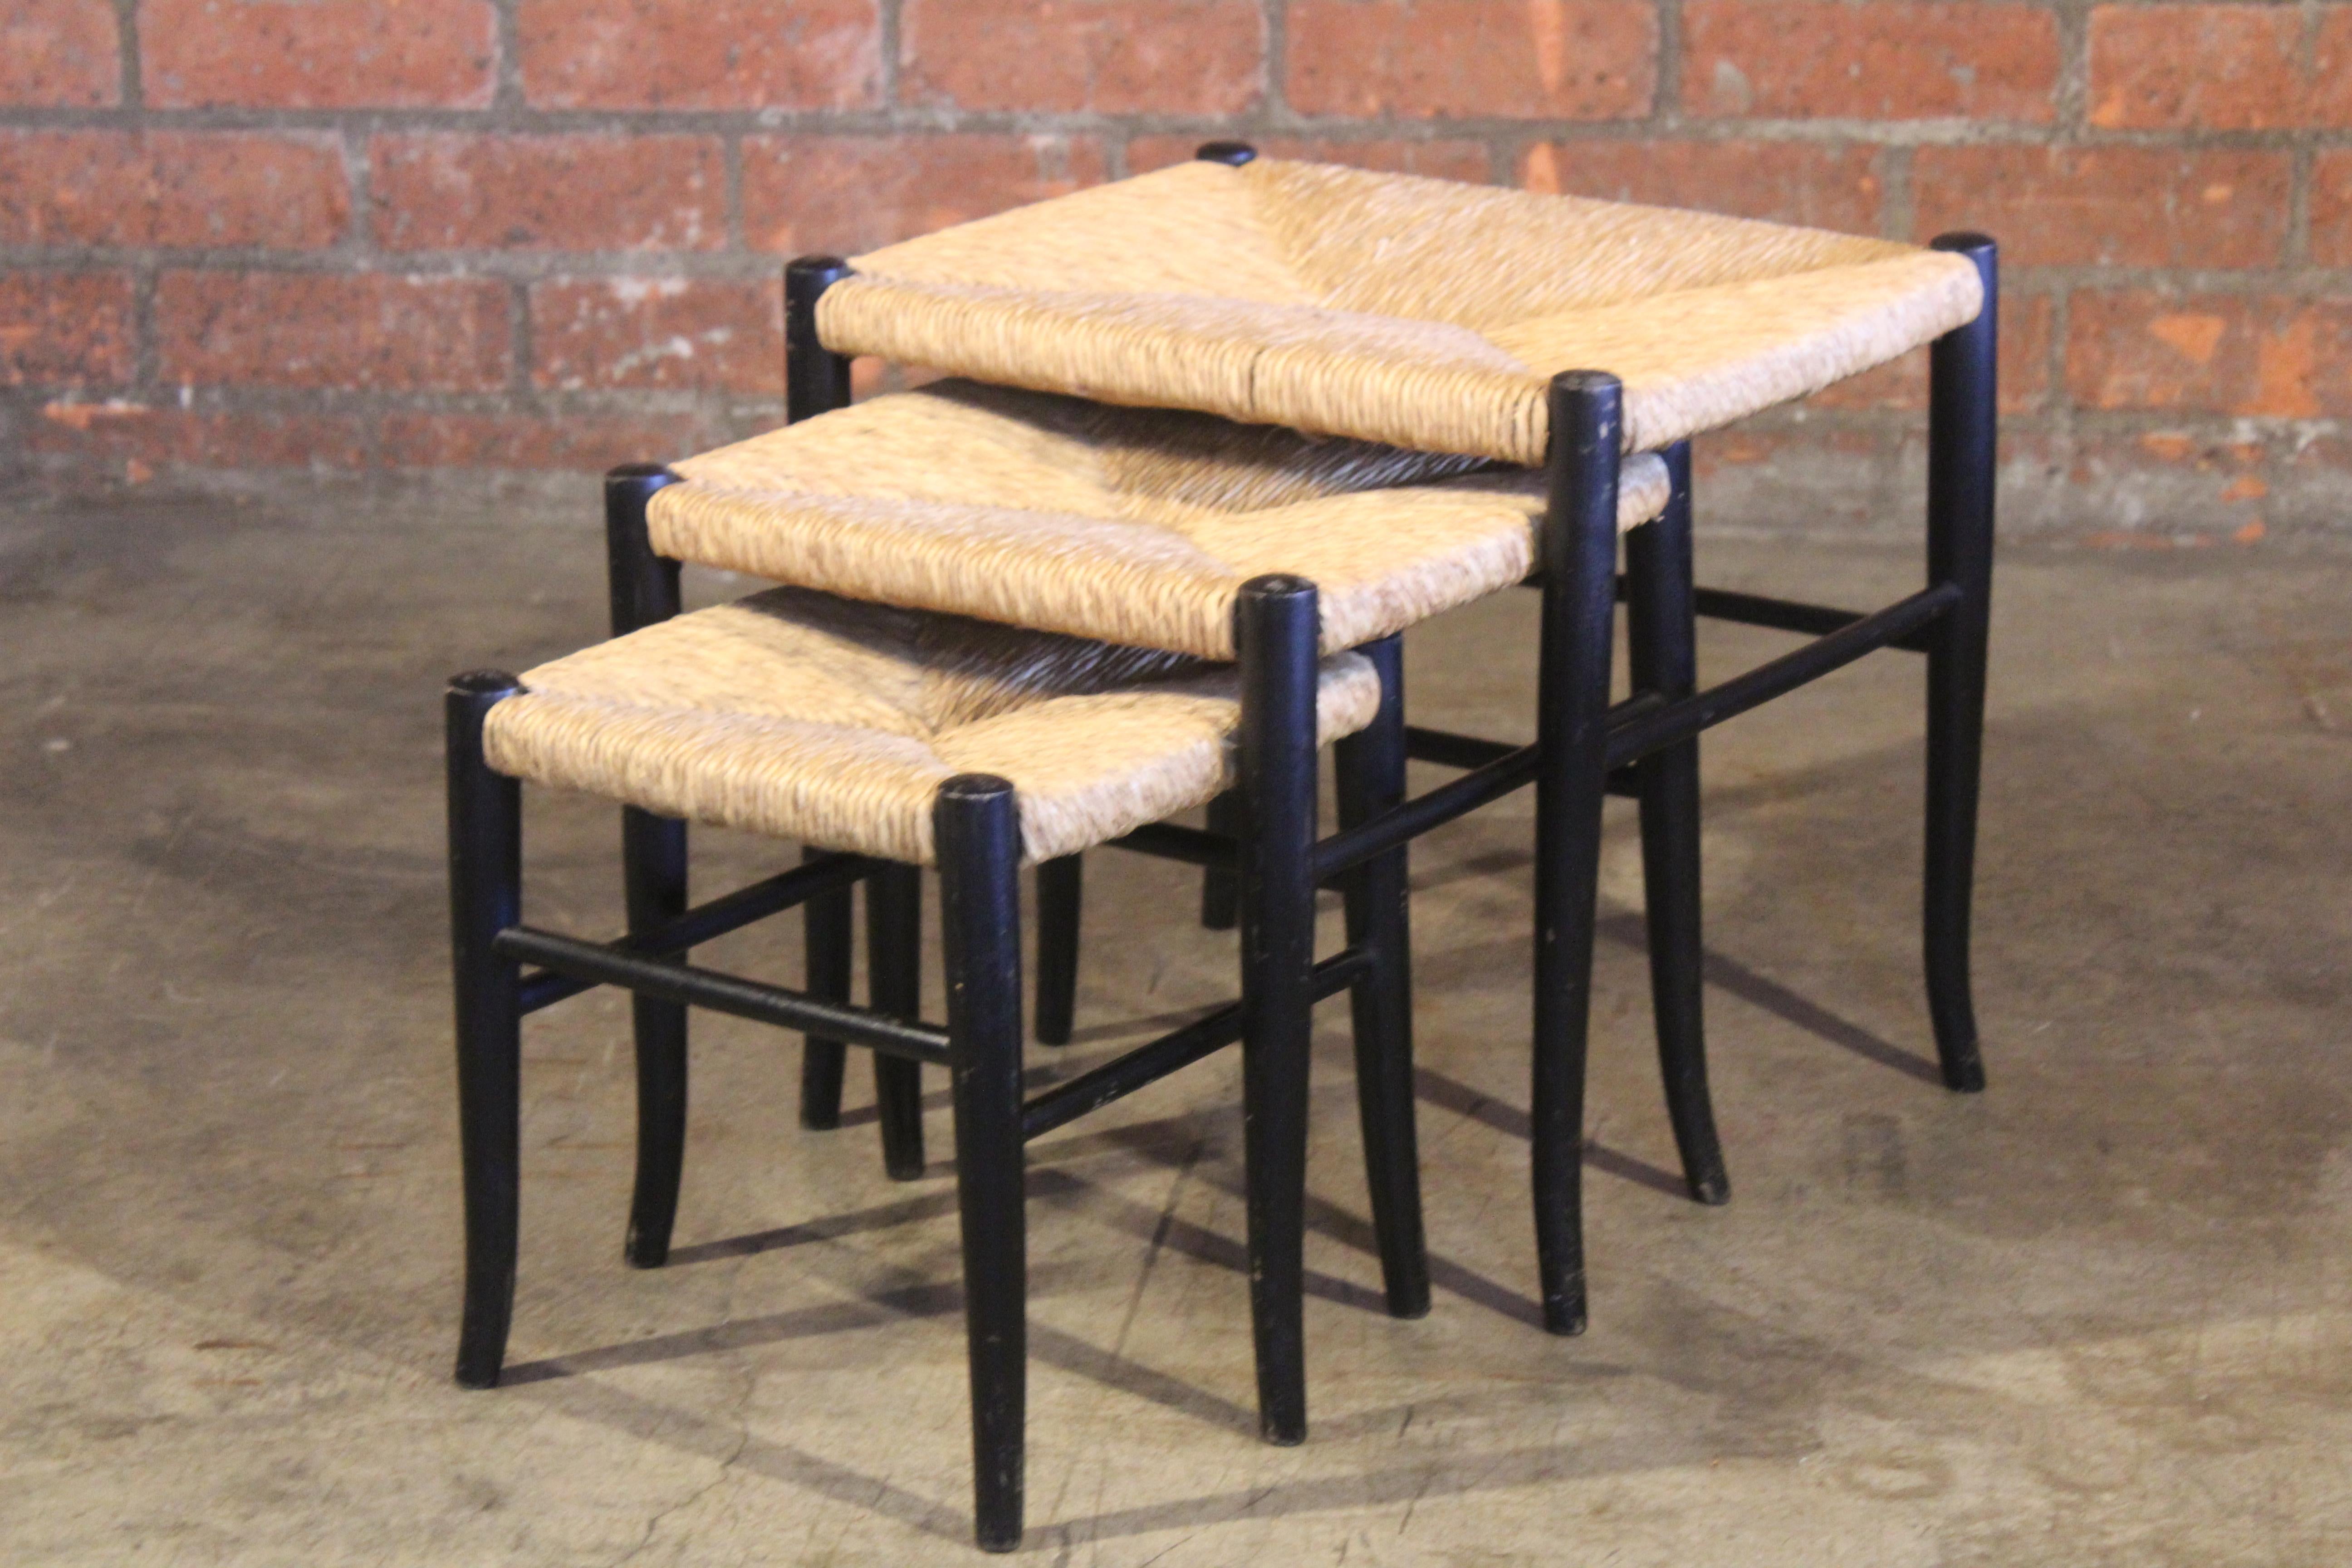 Set of three nesting tables or stools with rush seats. Original black finish. Each stool is in original condition and shows age appropriate wear.